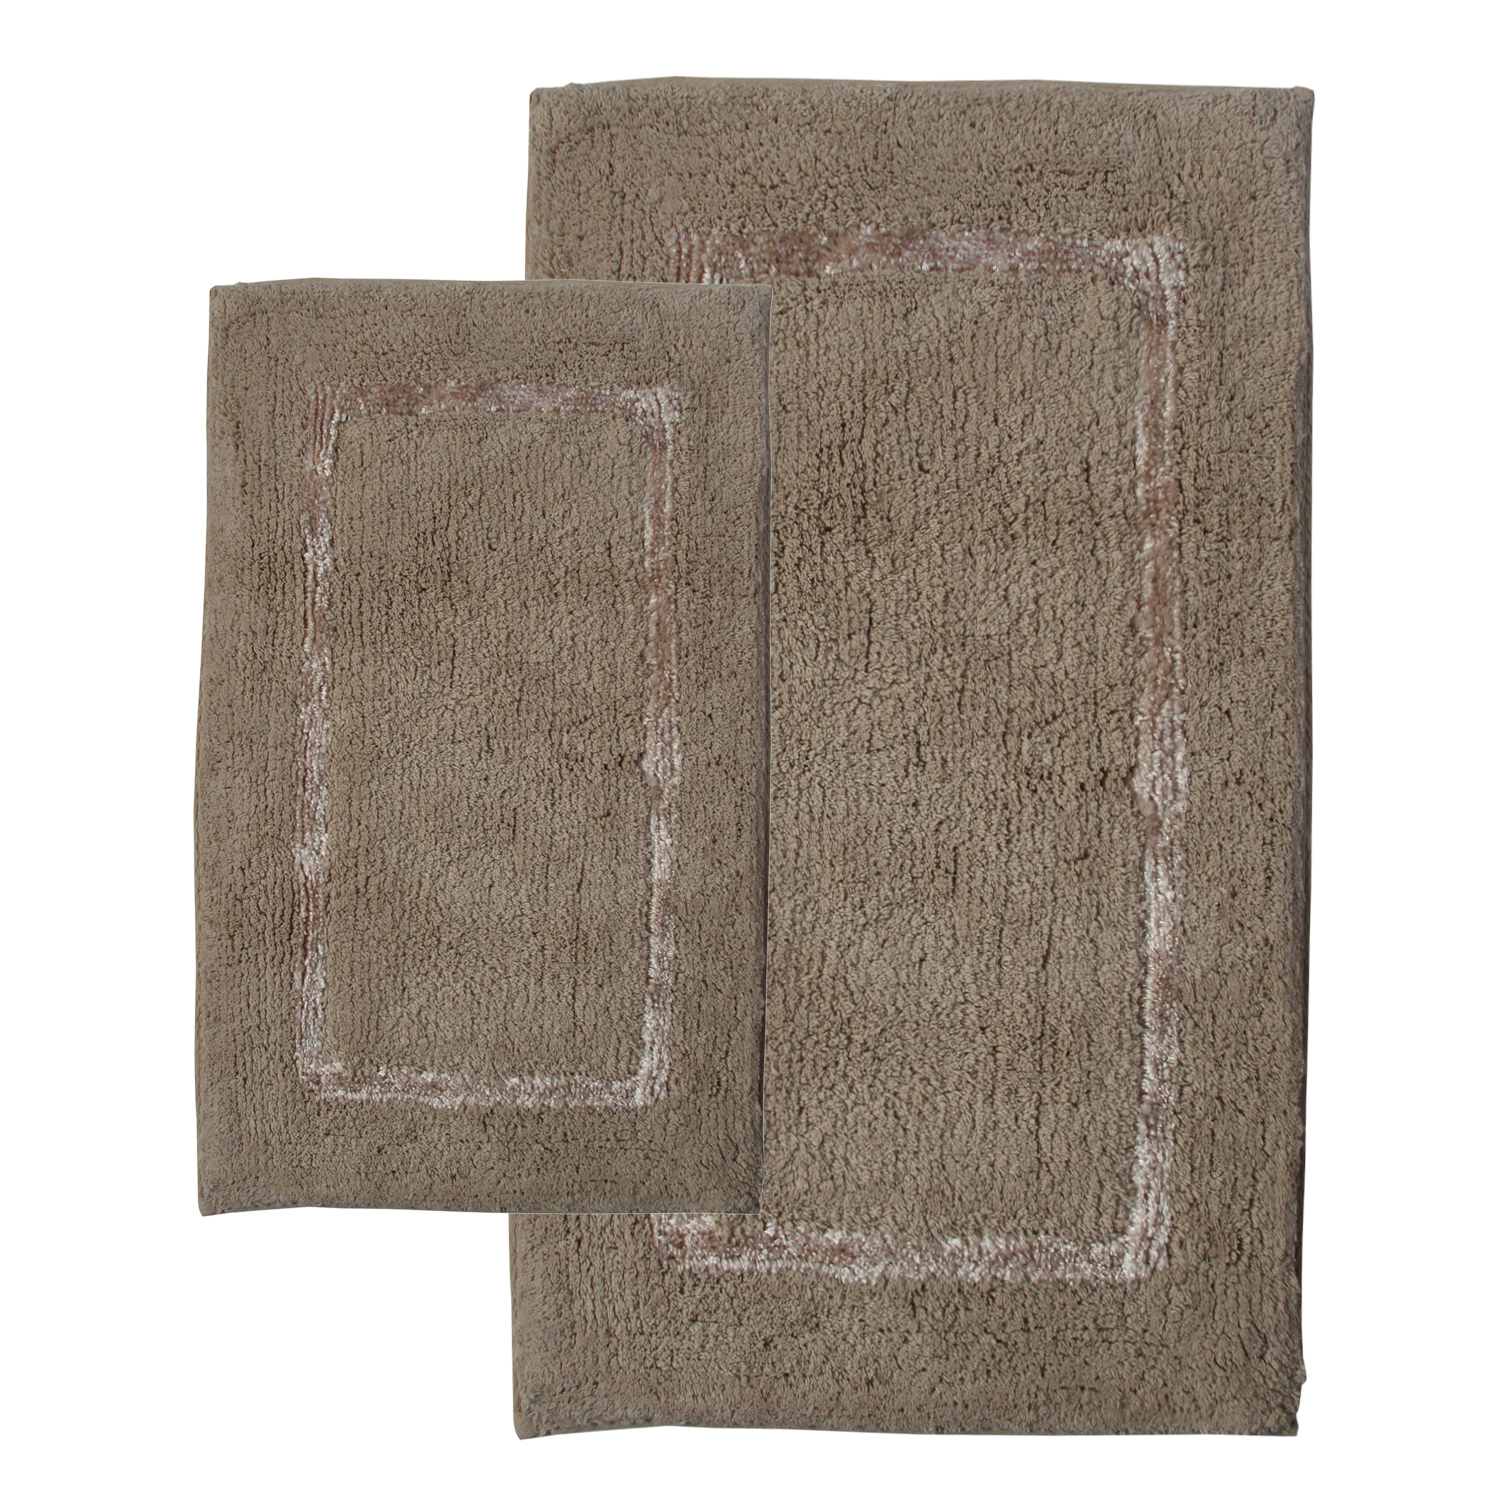 2 Piece Greenville Bath Rug Set - 21"x34" and 17"x24" - Sand color